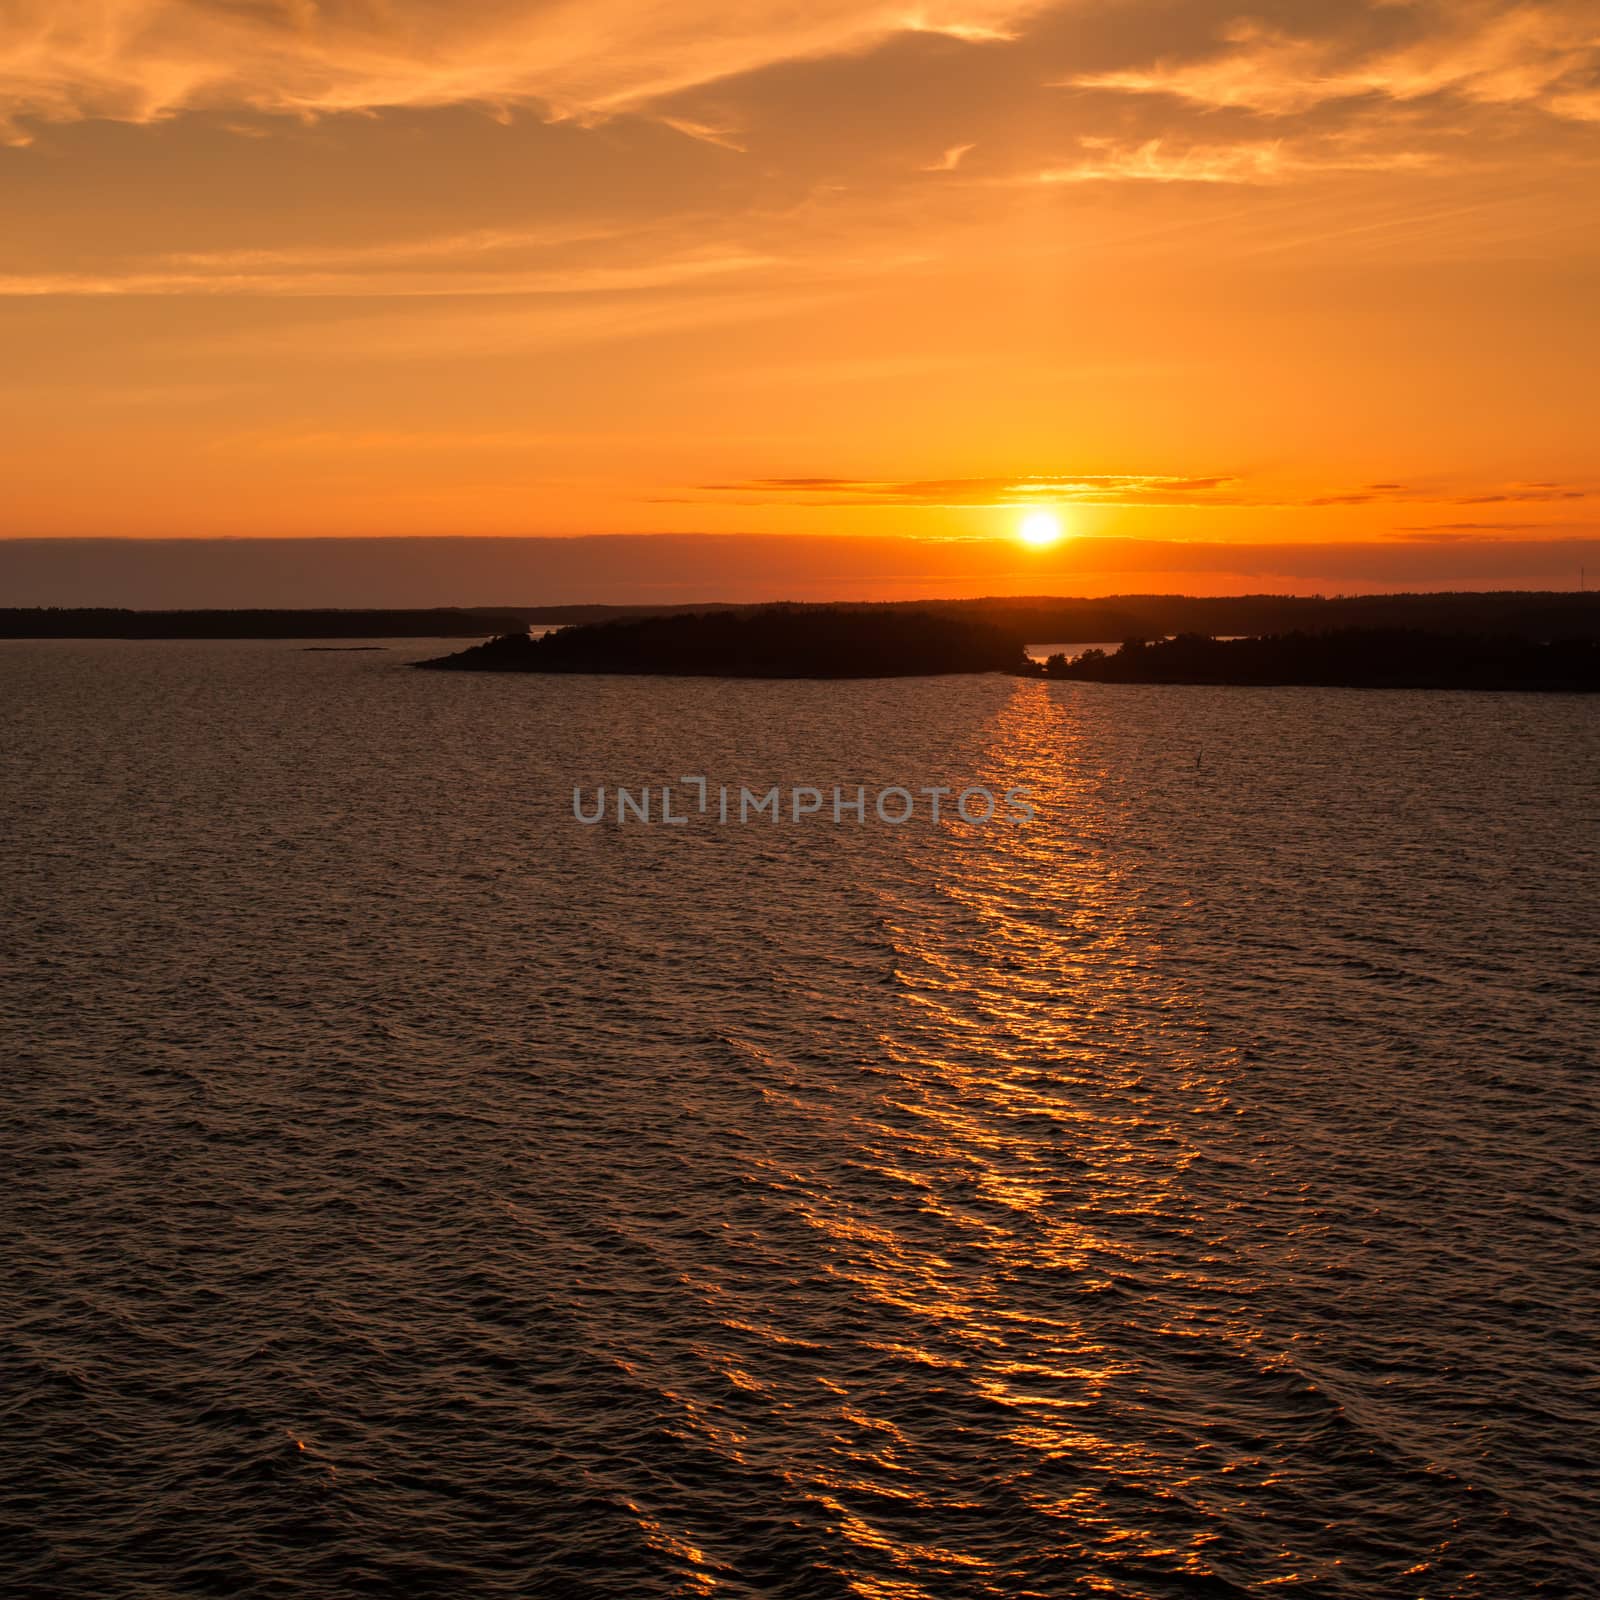 A sunset image on the Baltic Sea taken from the deck of a cruise ship.